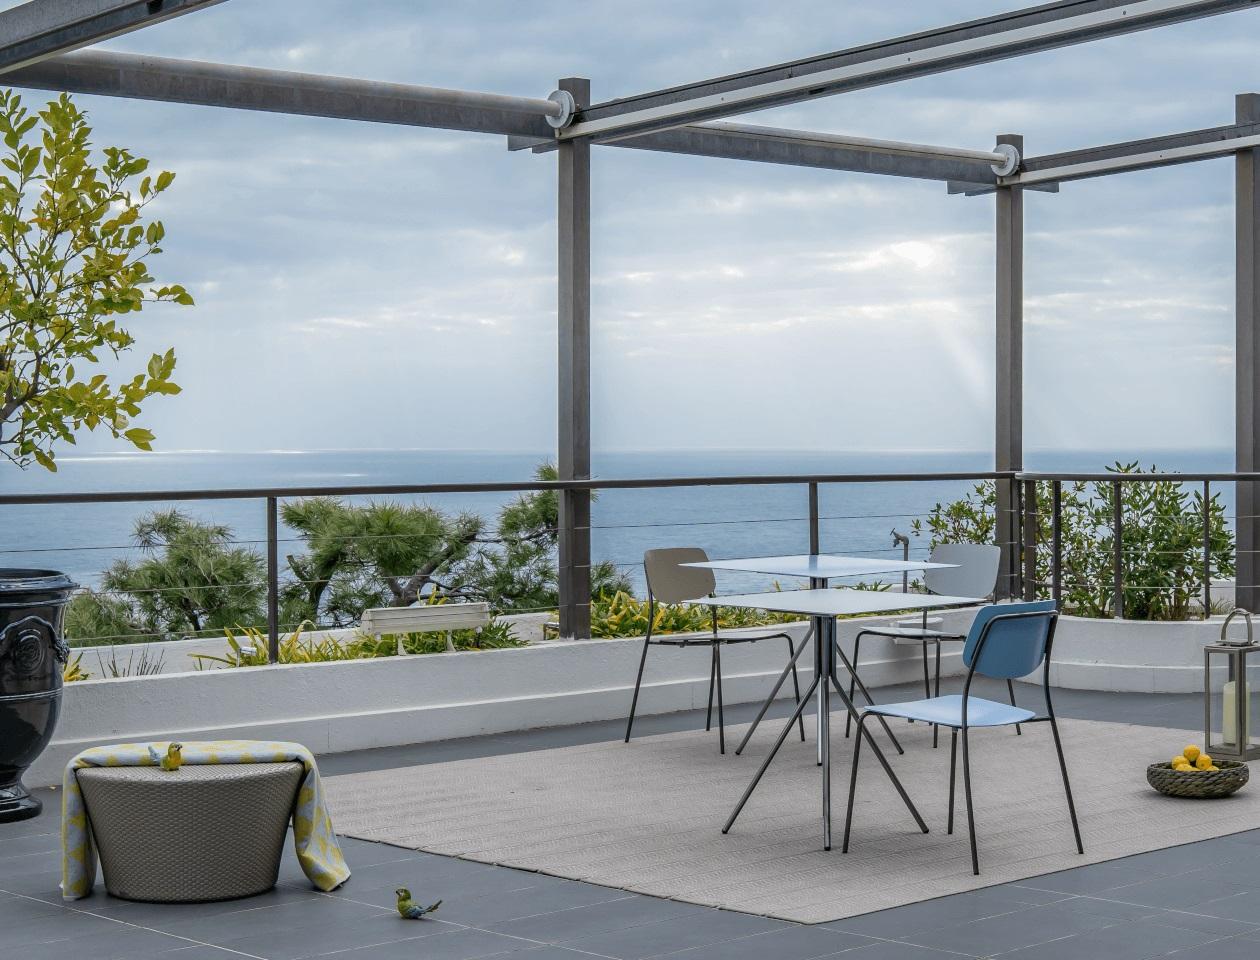 The Felber T18 table is an outdoor, weather-resistant dining folding table. It is elegant and adaptable to all situations. It is heavy enough to safely stay outside all year long.

Dietiker FELBER T18 Indoor/Outdoor table
Frame: Steel - I